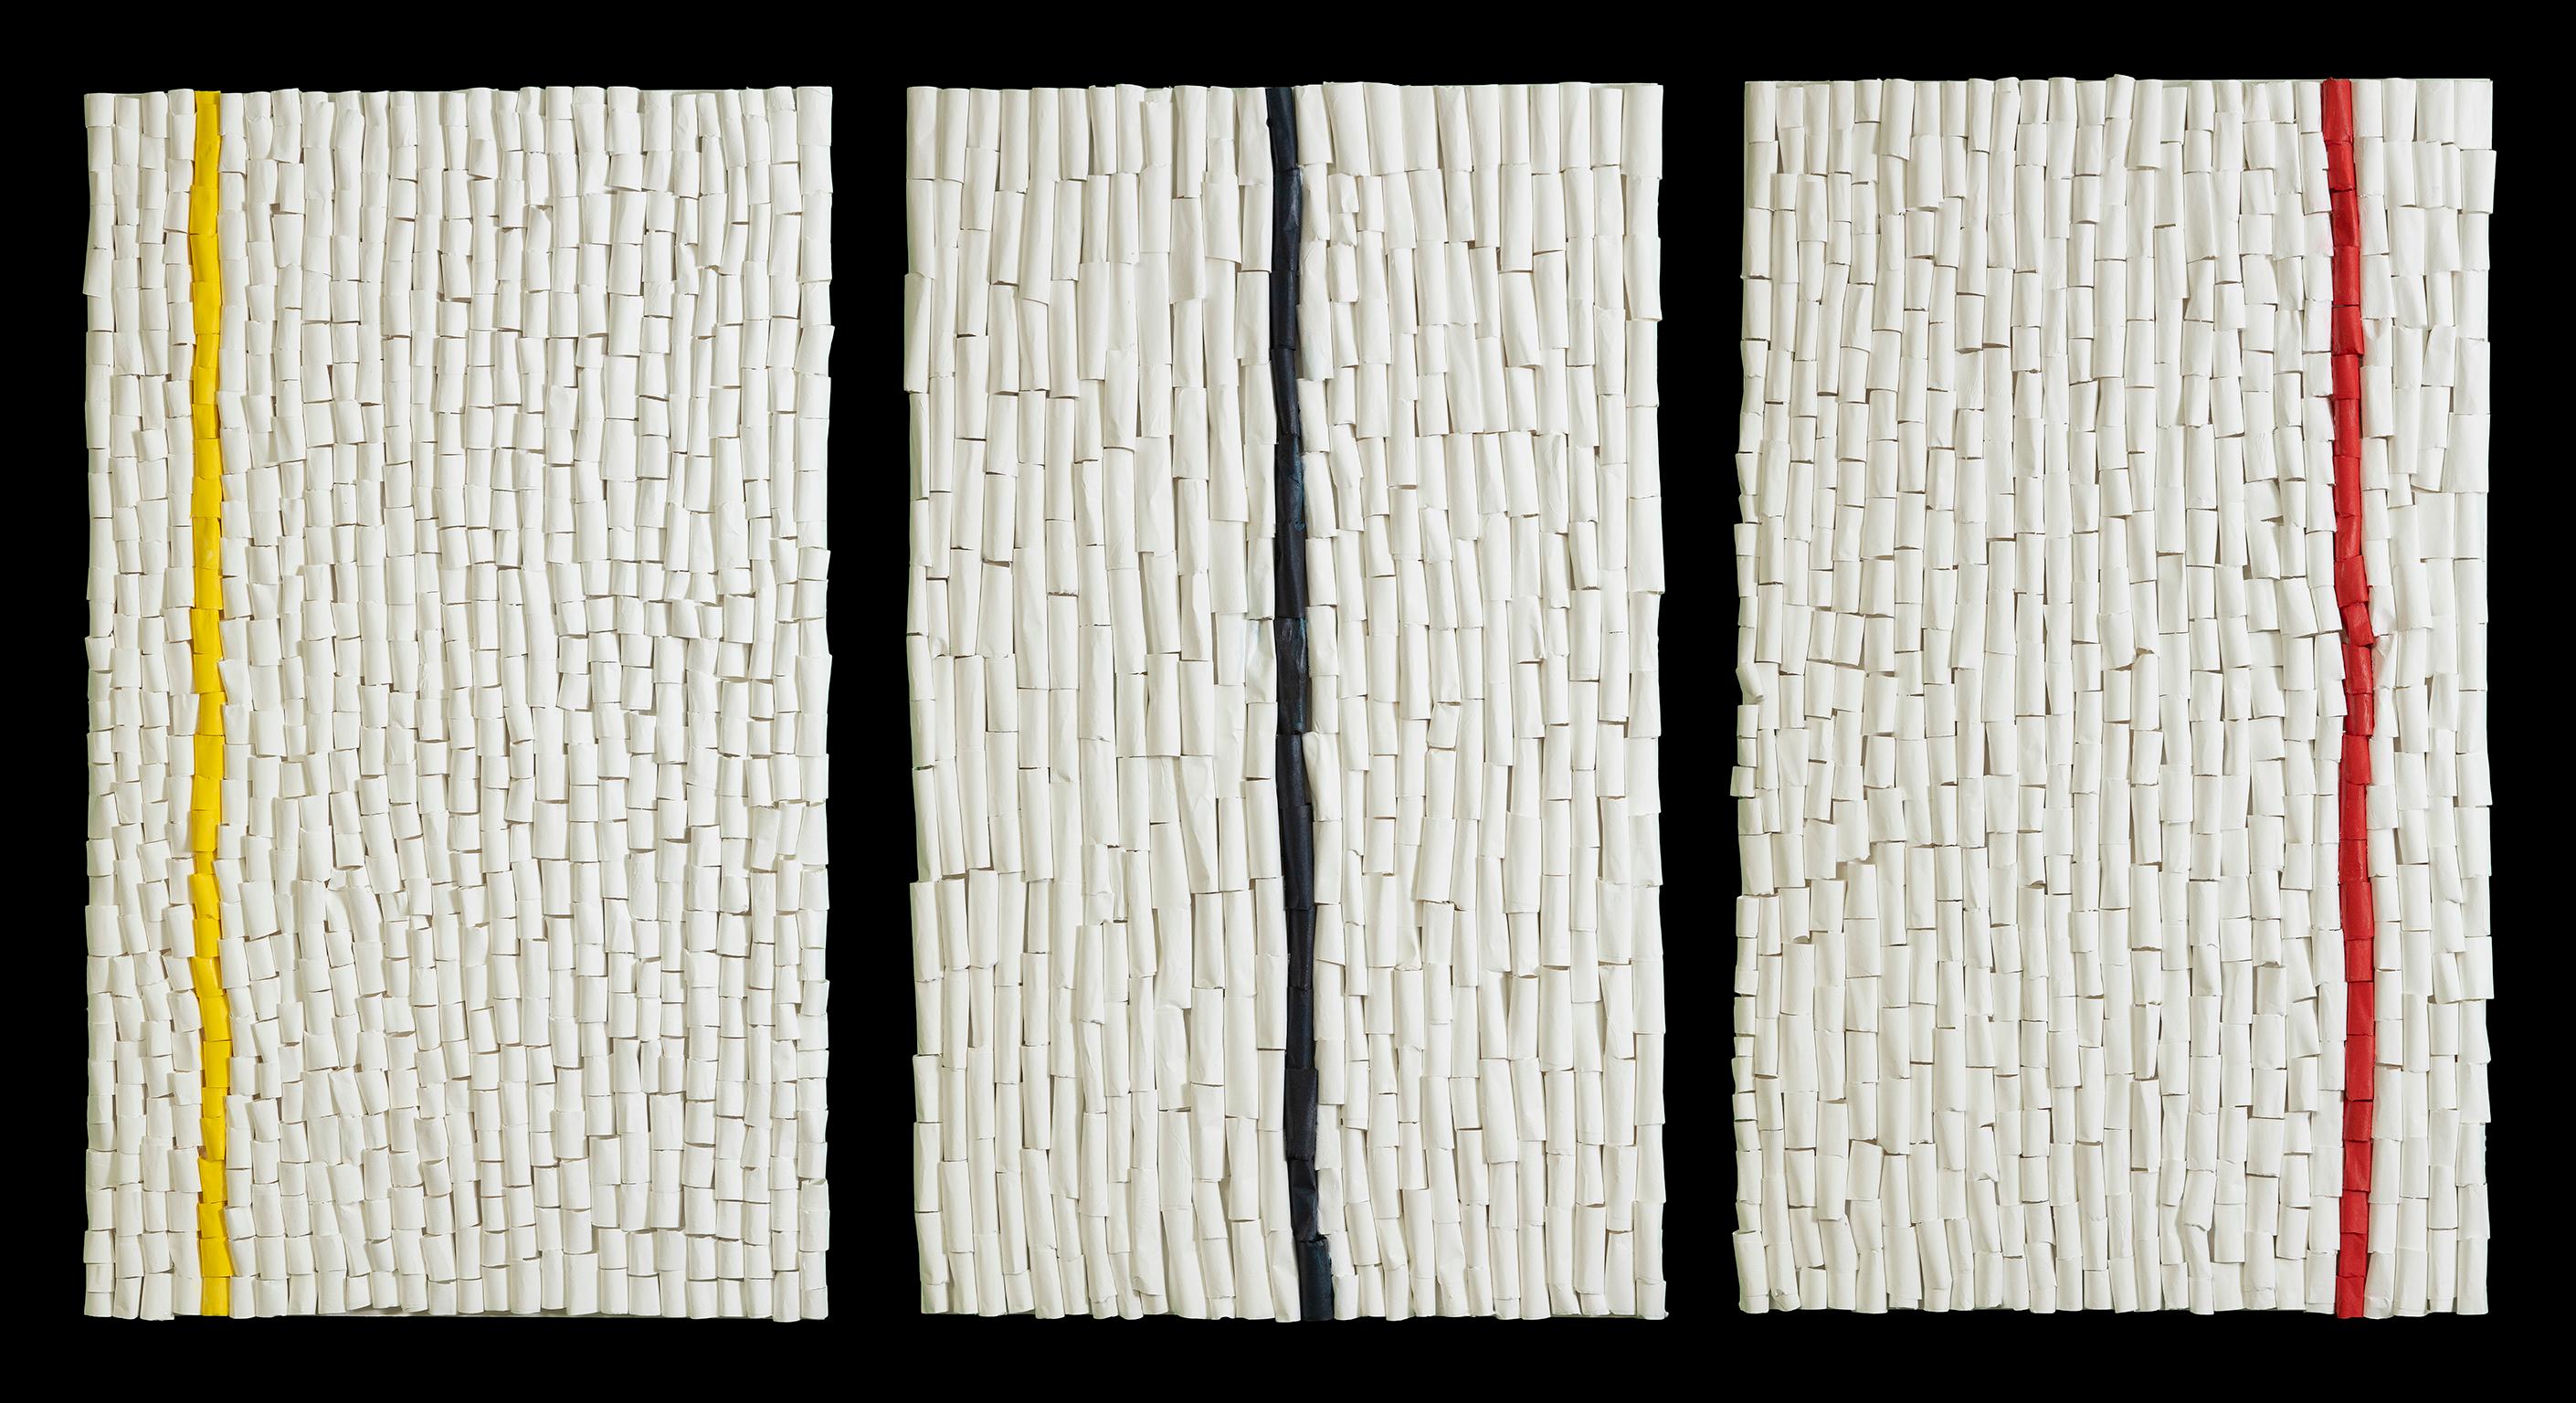 'In Parallel' (triptych), 2019 by American artist Barbara Hirsch. Rice paper with acrylic on wood panel, 28 x 51 in. / 28 x 17 in. (each). An abstract mixed media, sculptural work in white on wood panel with bands in colors of yellow, red, and